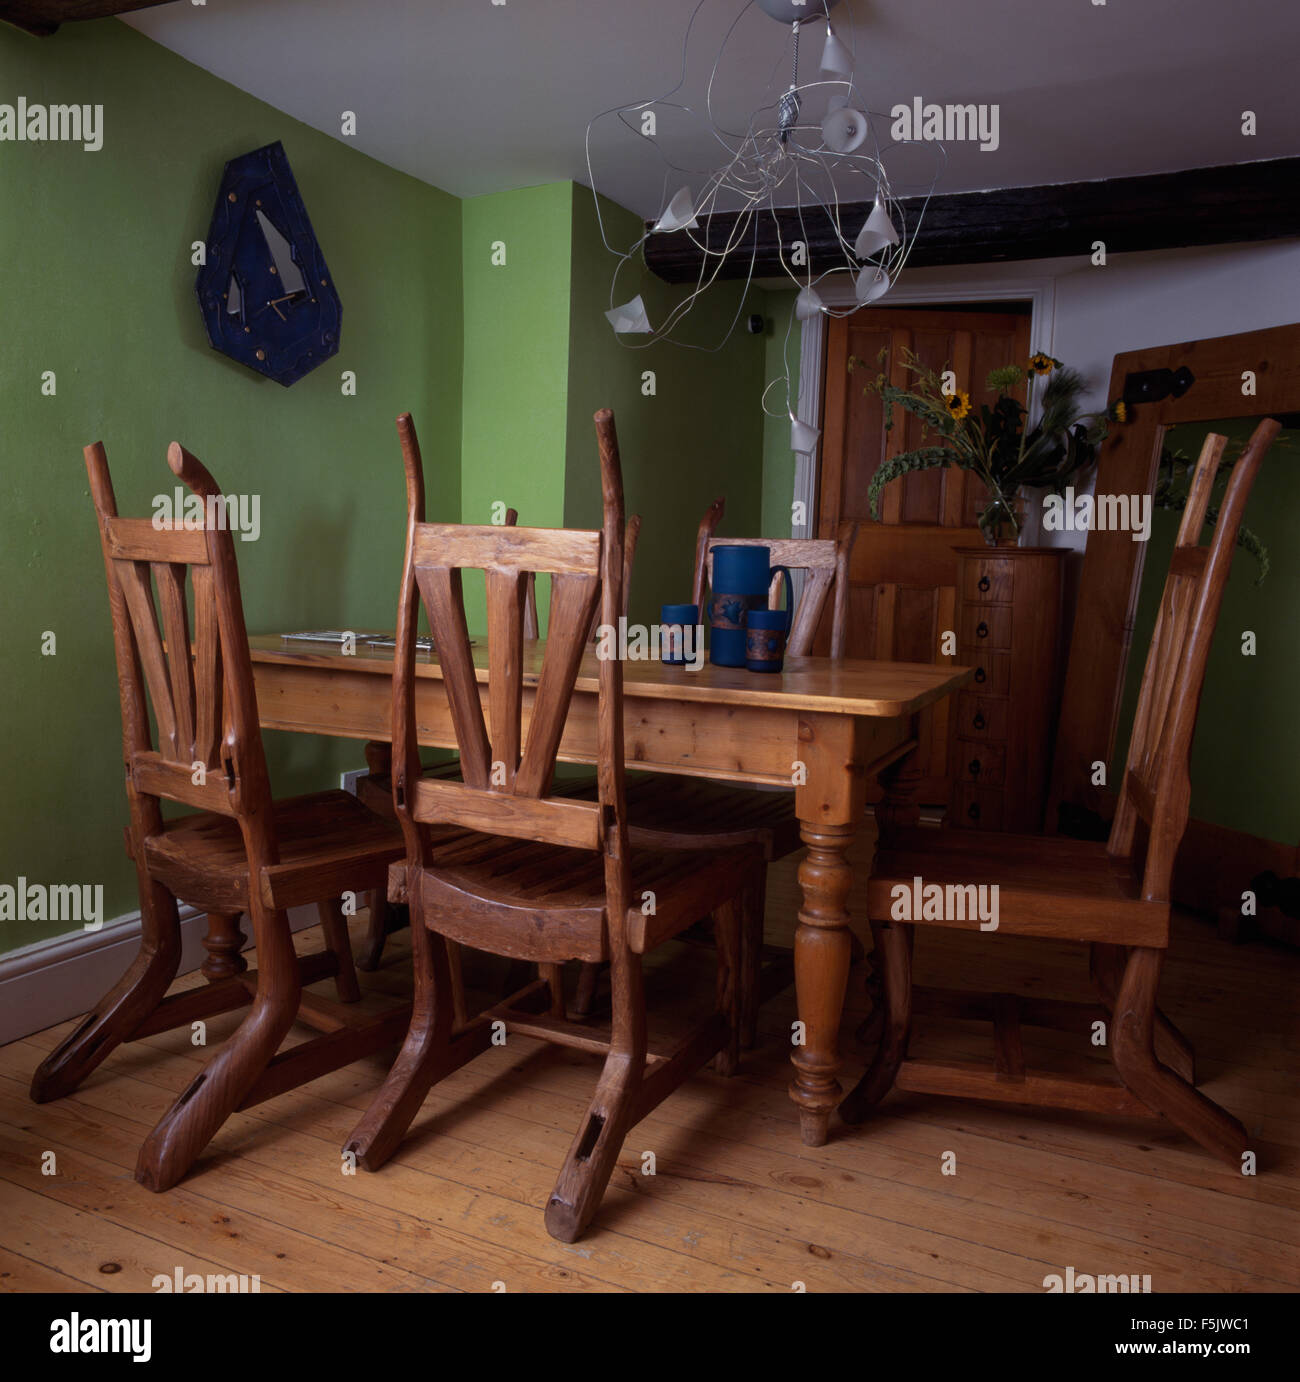 Carved rustic wooden chairs at a pine table in a nineties dining room with a twisted metal light fitting and wooden flooring Stock Photo